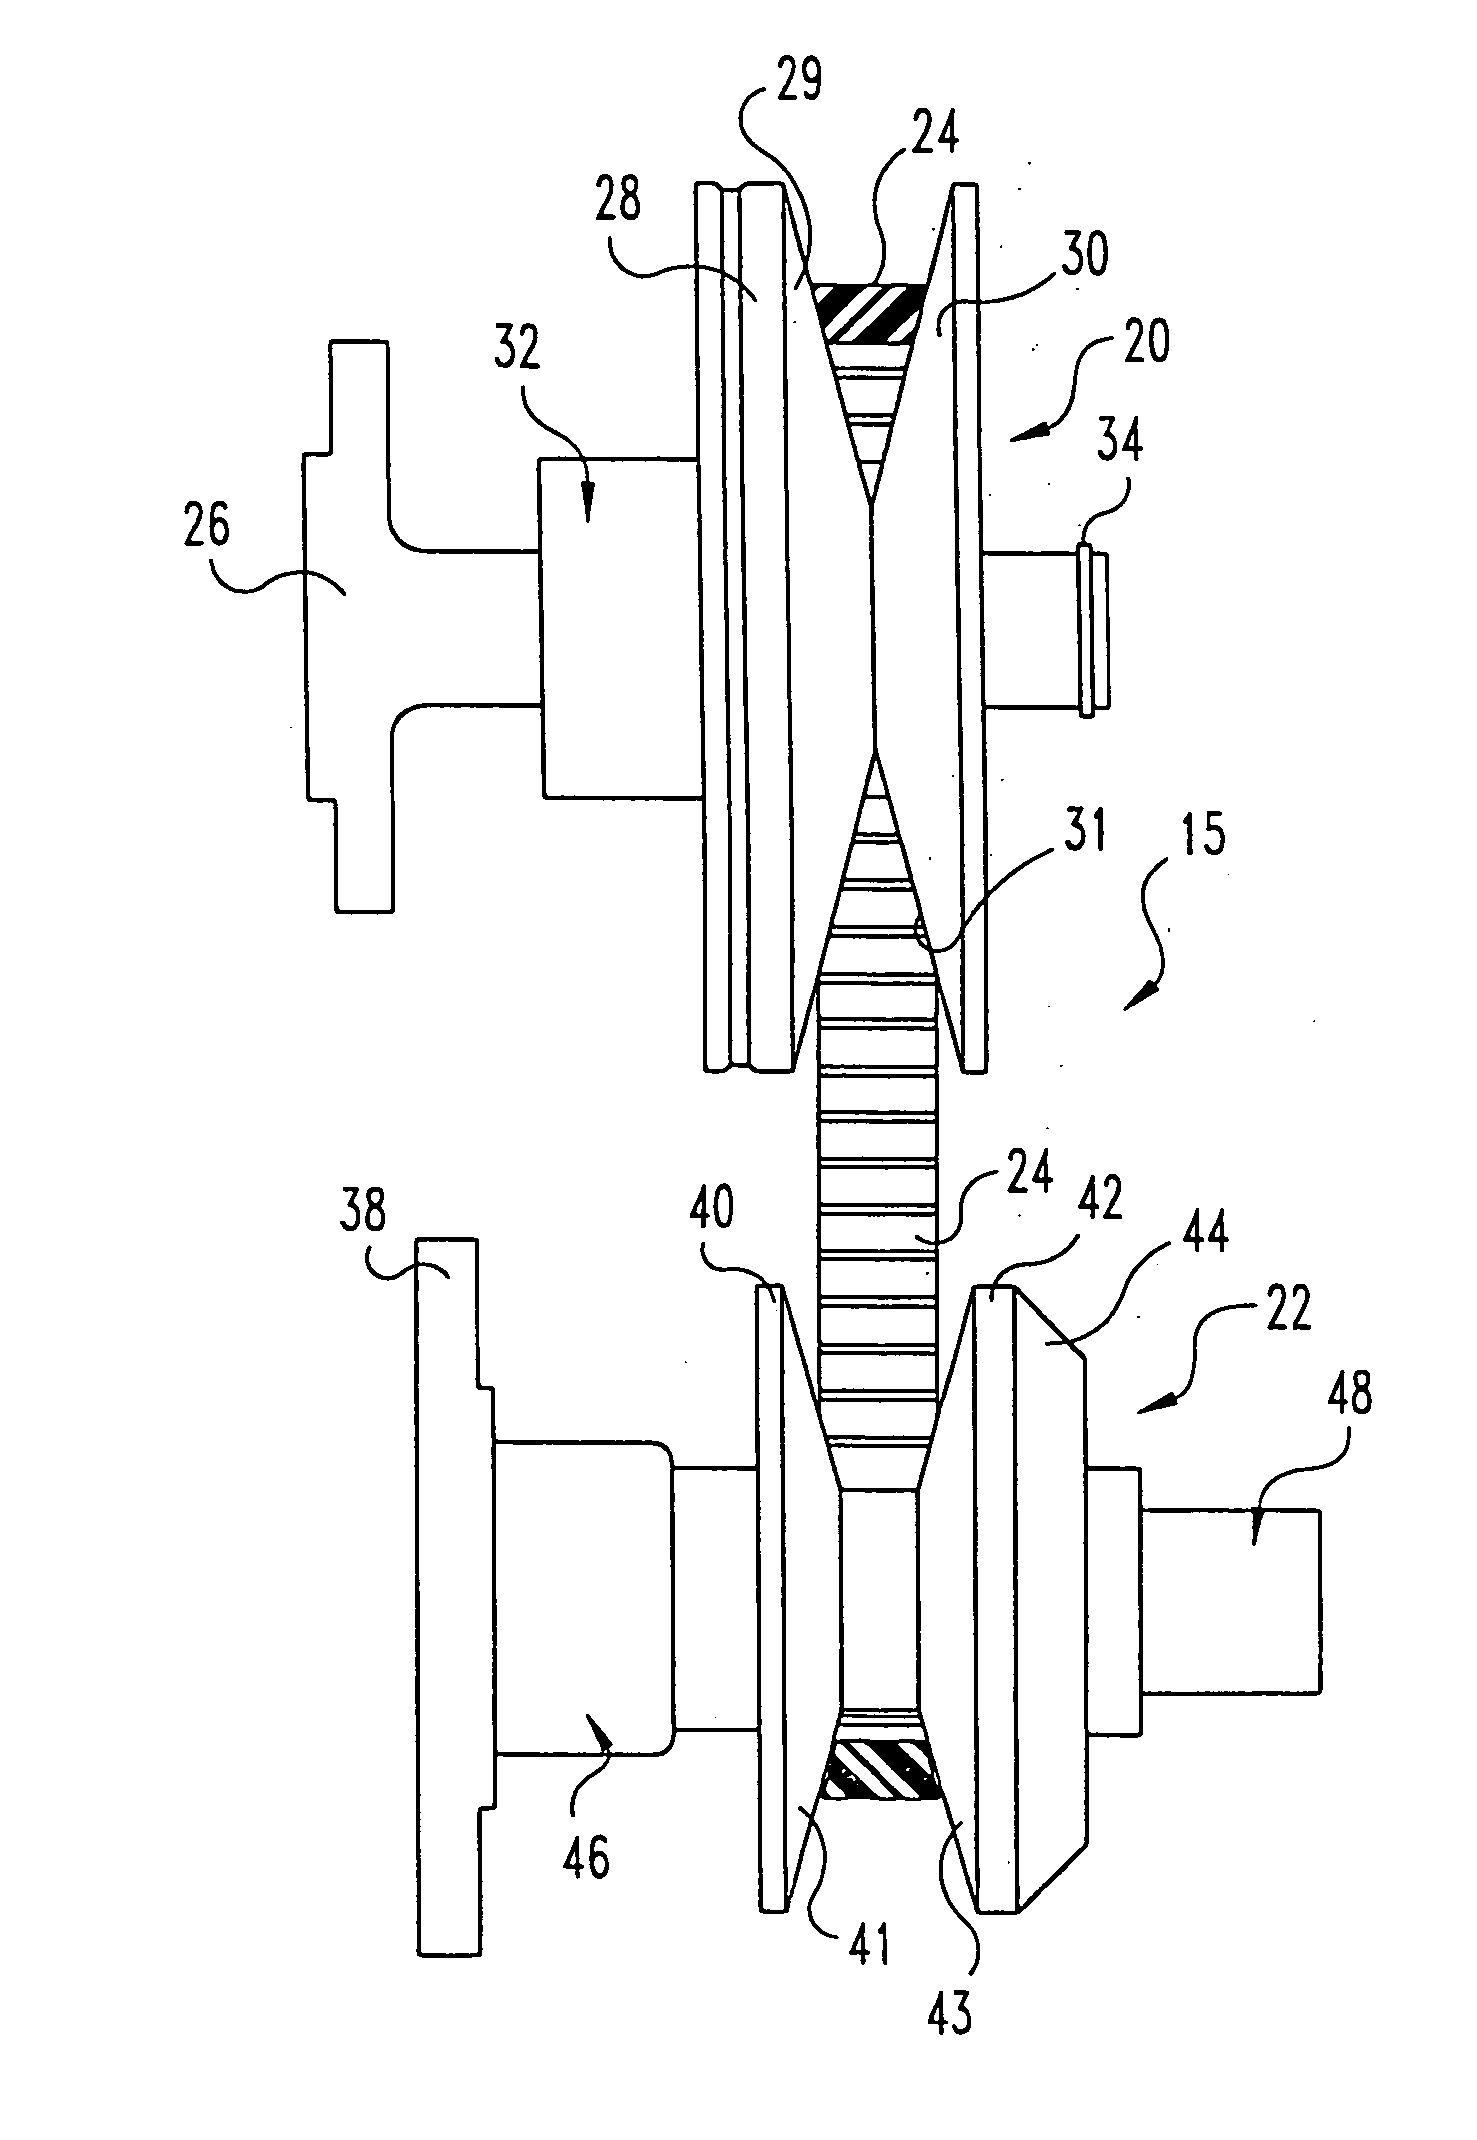 Continuously variable belt drive system